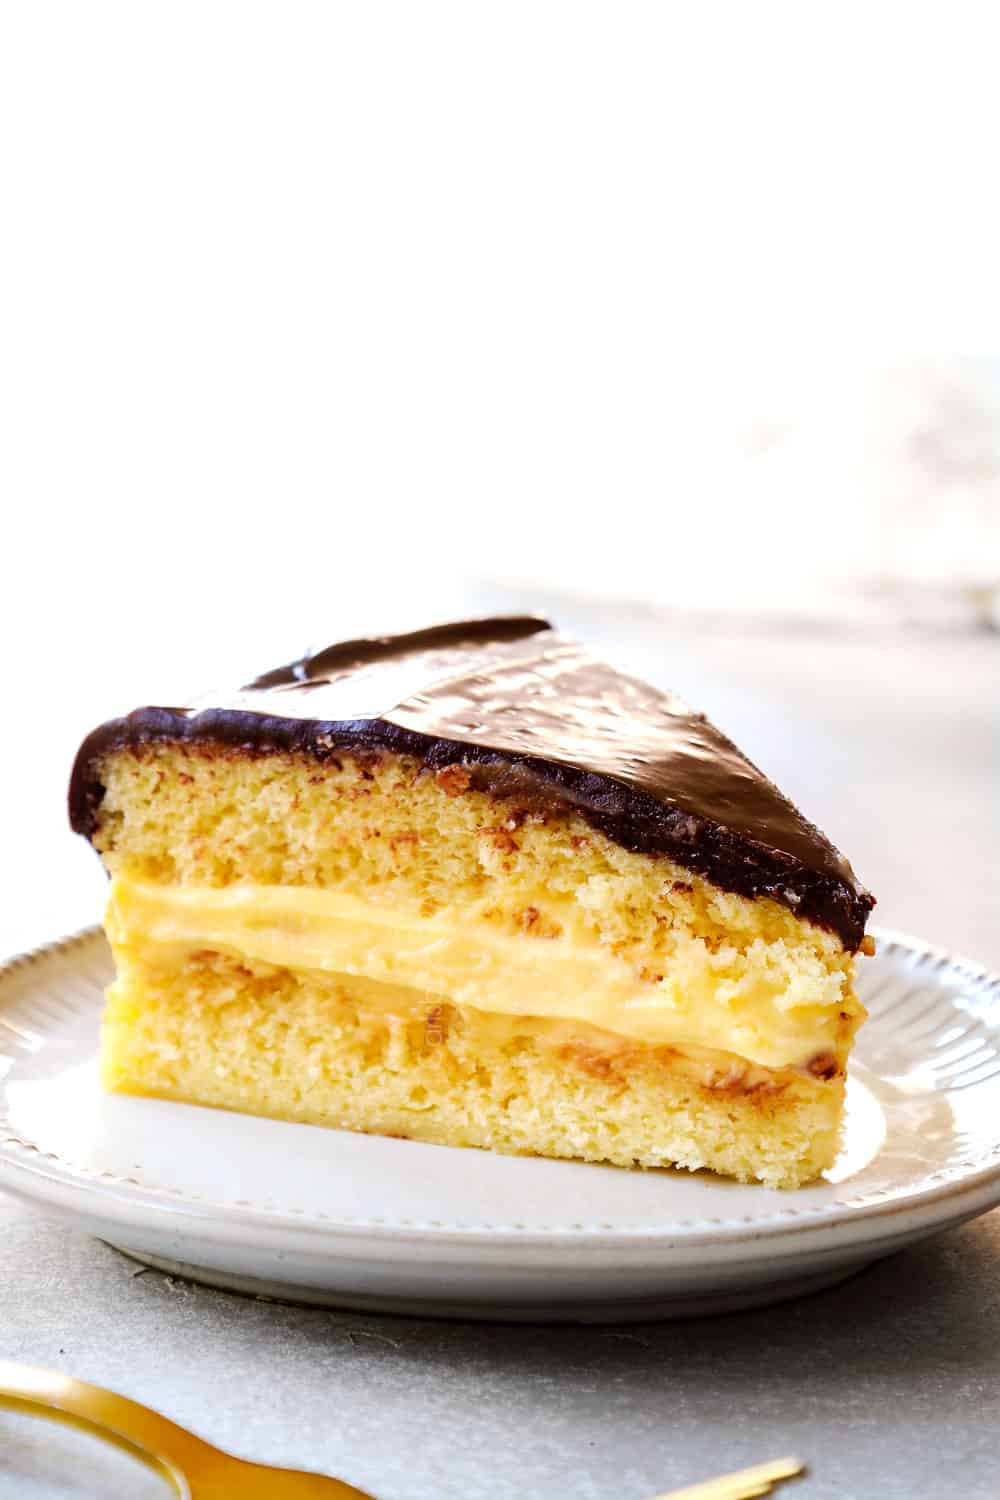 up close of a slice of Boston Cream Pie showing how thick the pastry cream is